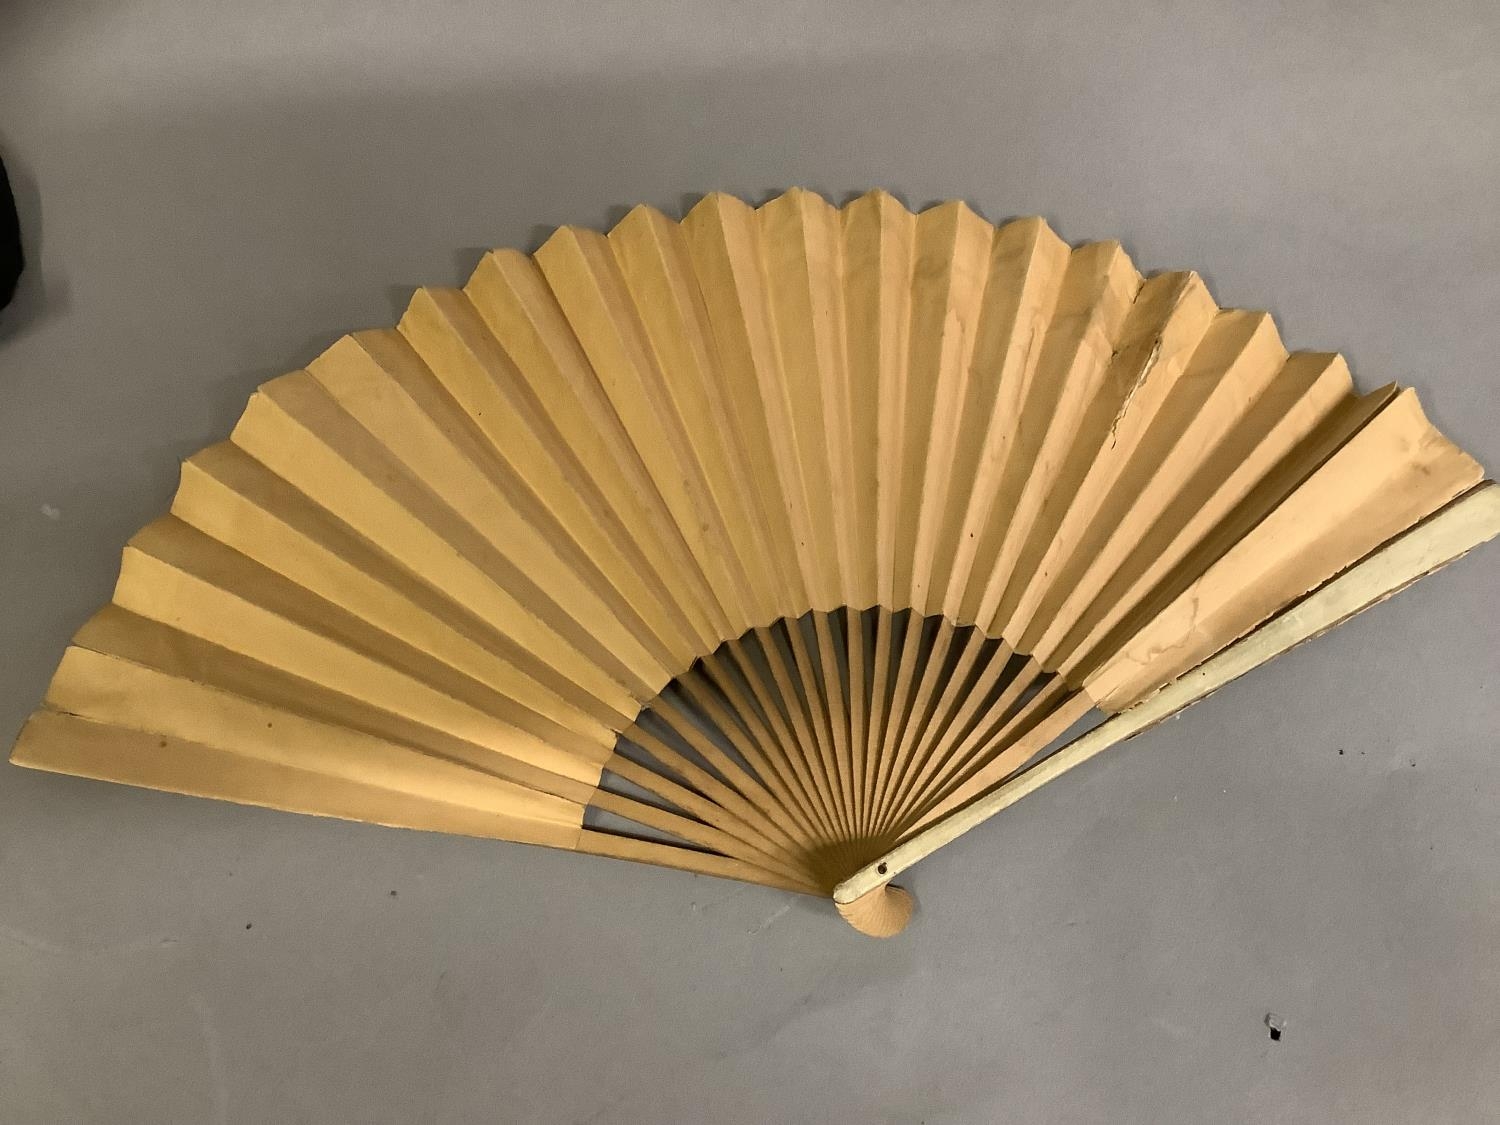 Royal Interest: a paper fan printed with a portrait of King Alfonso XIII and Queen Victoria of - Bild 4 aus 7